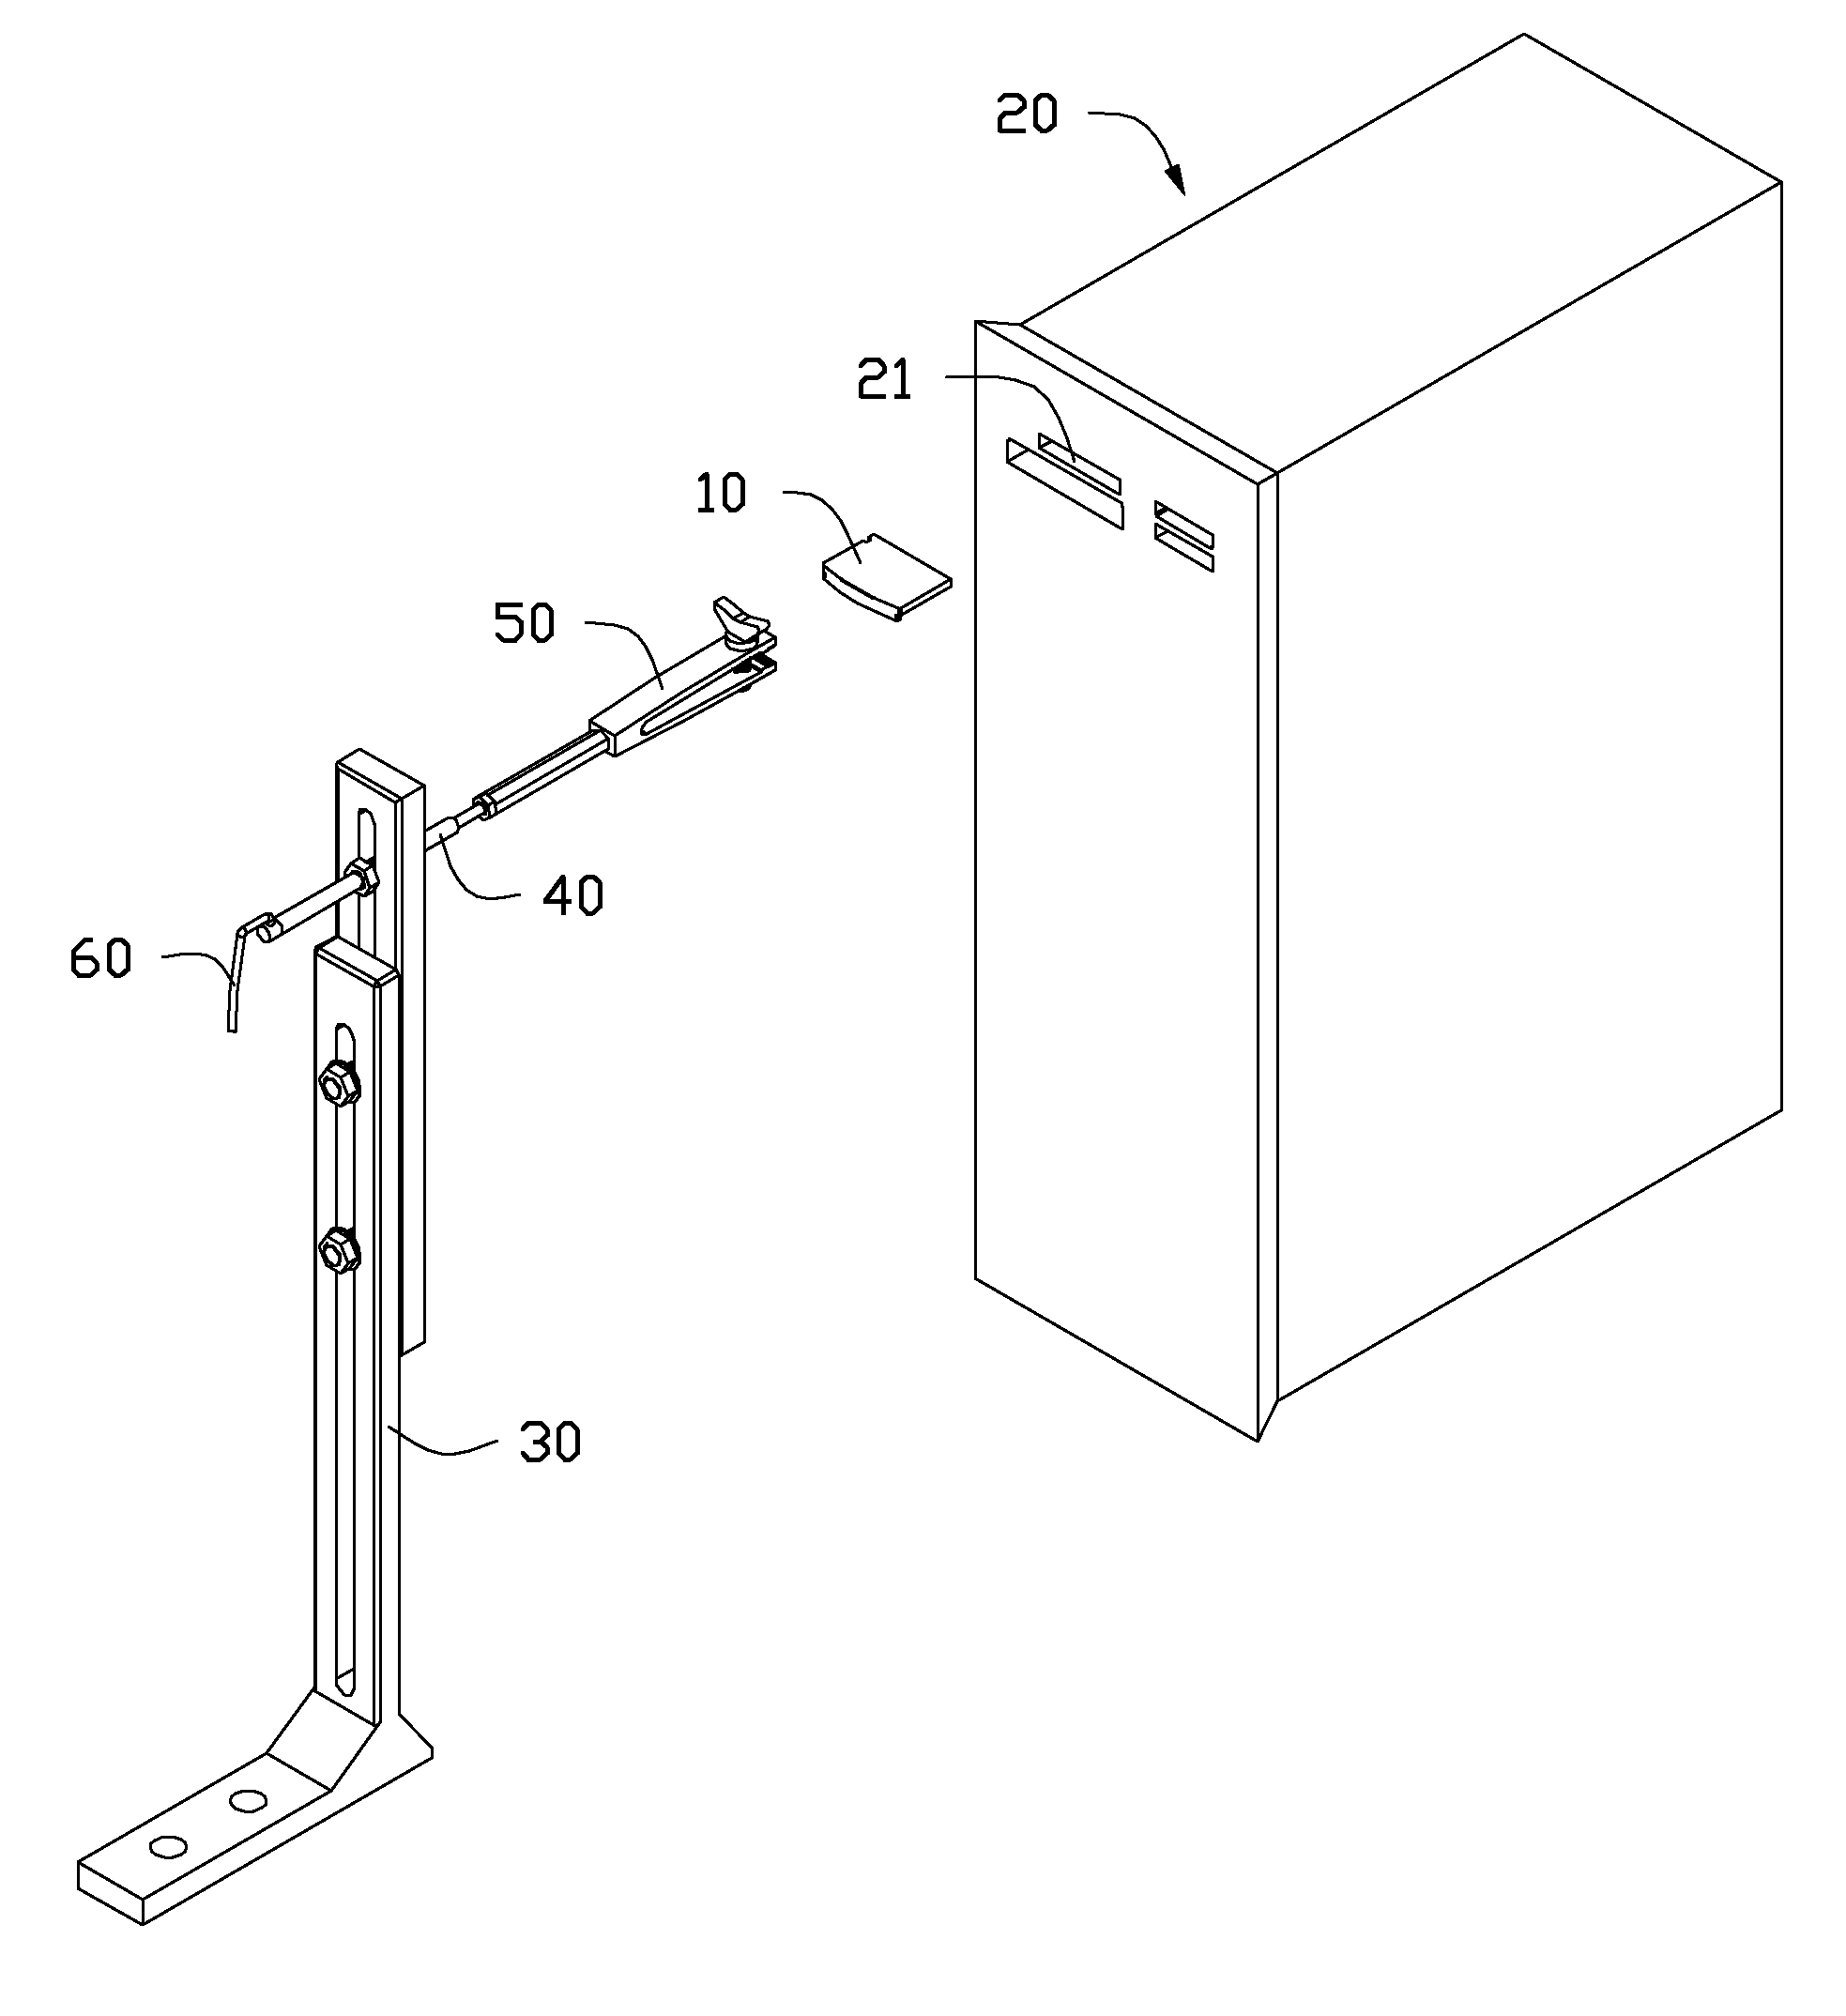 Testing apparatus for extension device